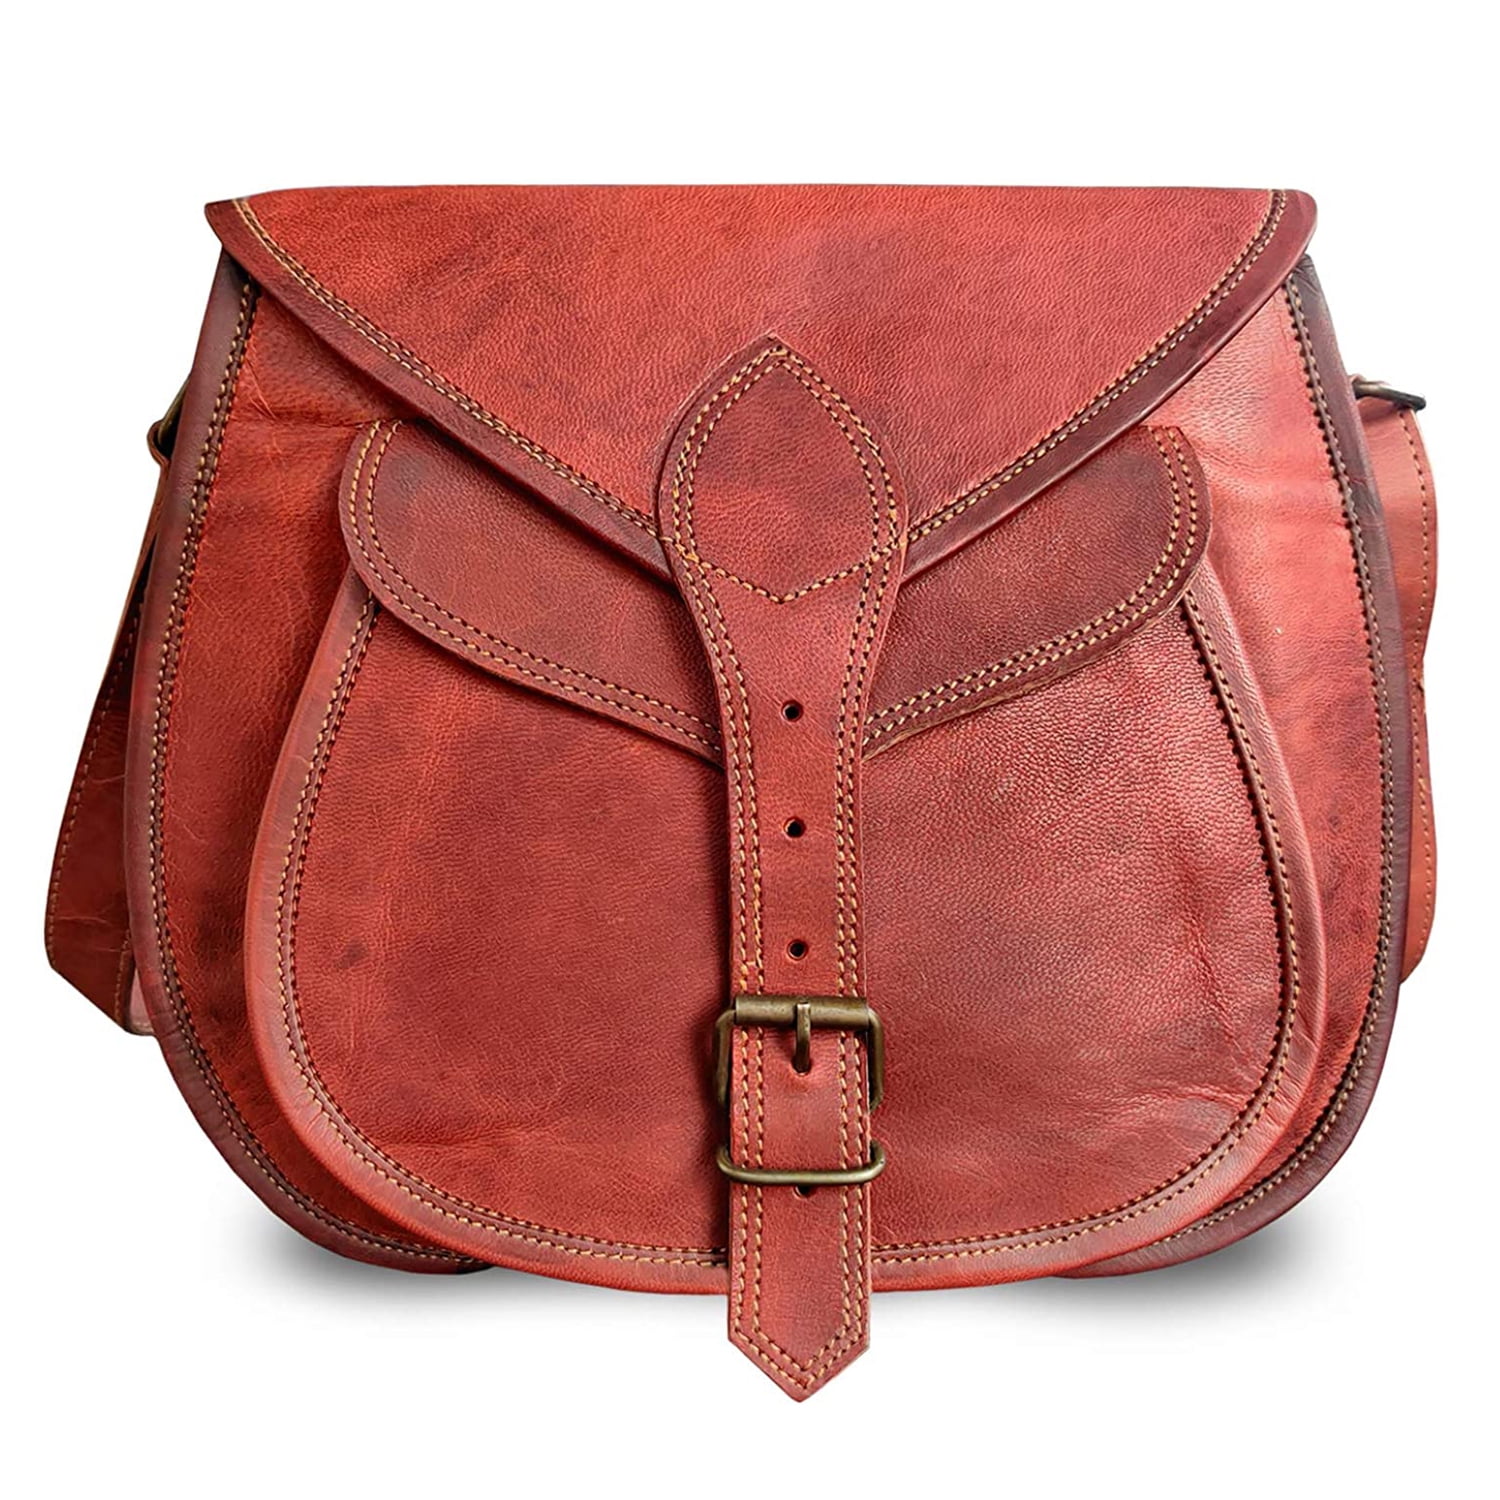 Women Saddle Bags Brown Leather Crossbody Bags Shoulder Bag for